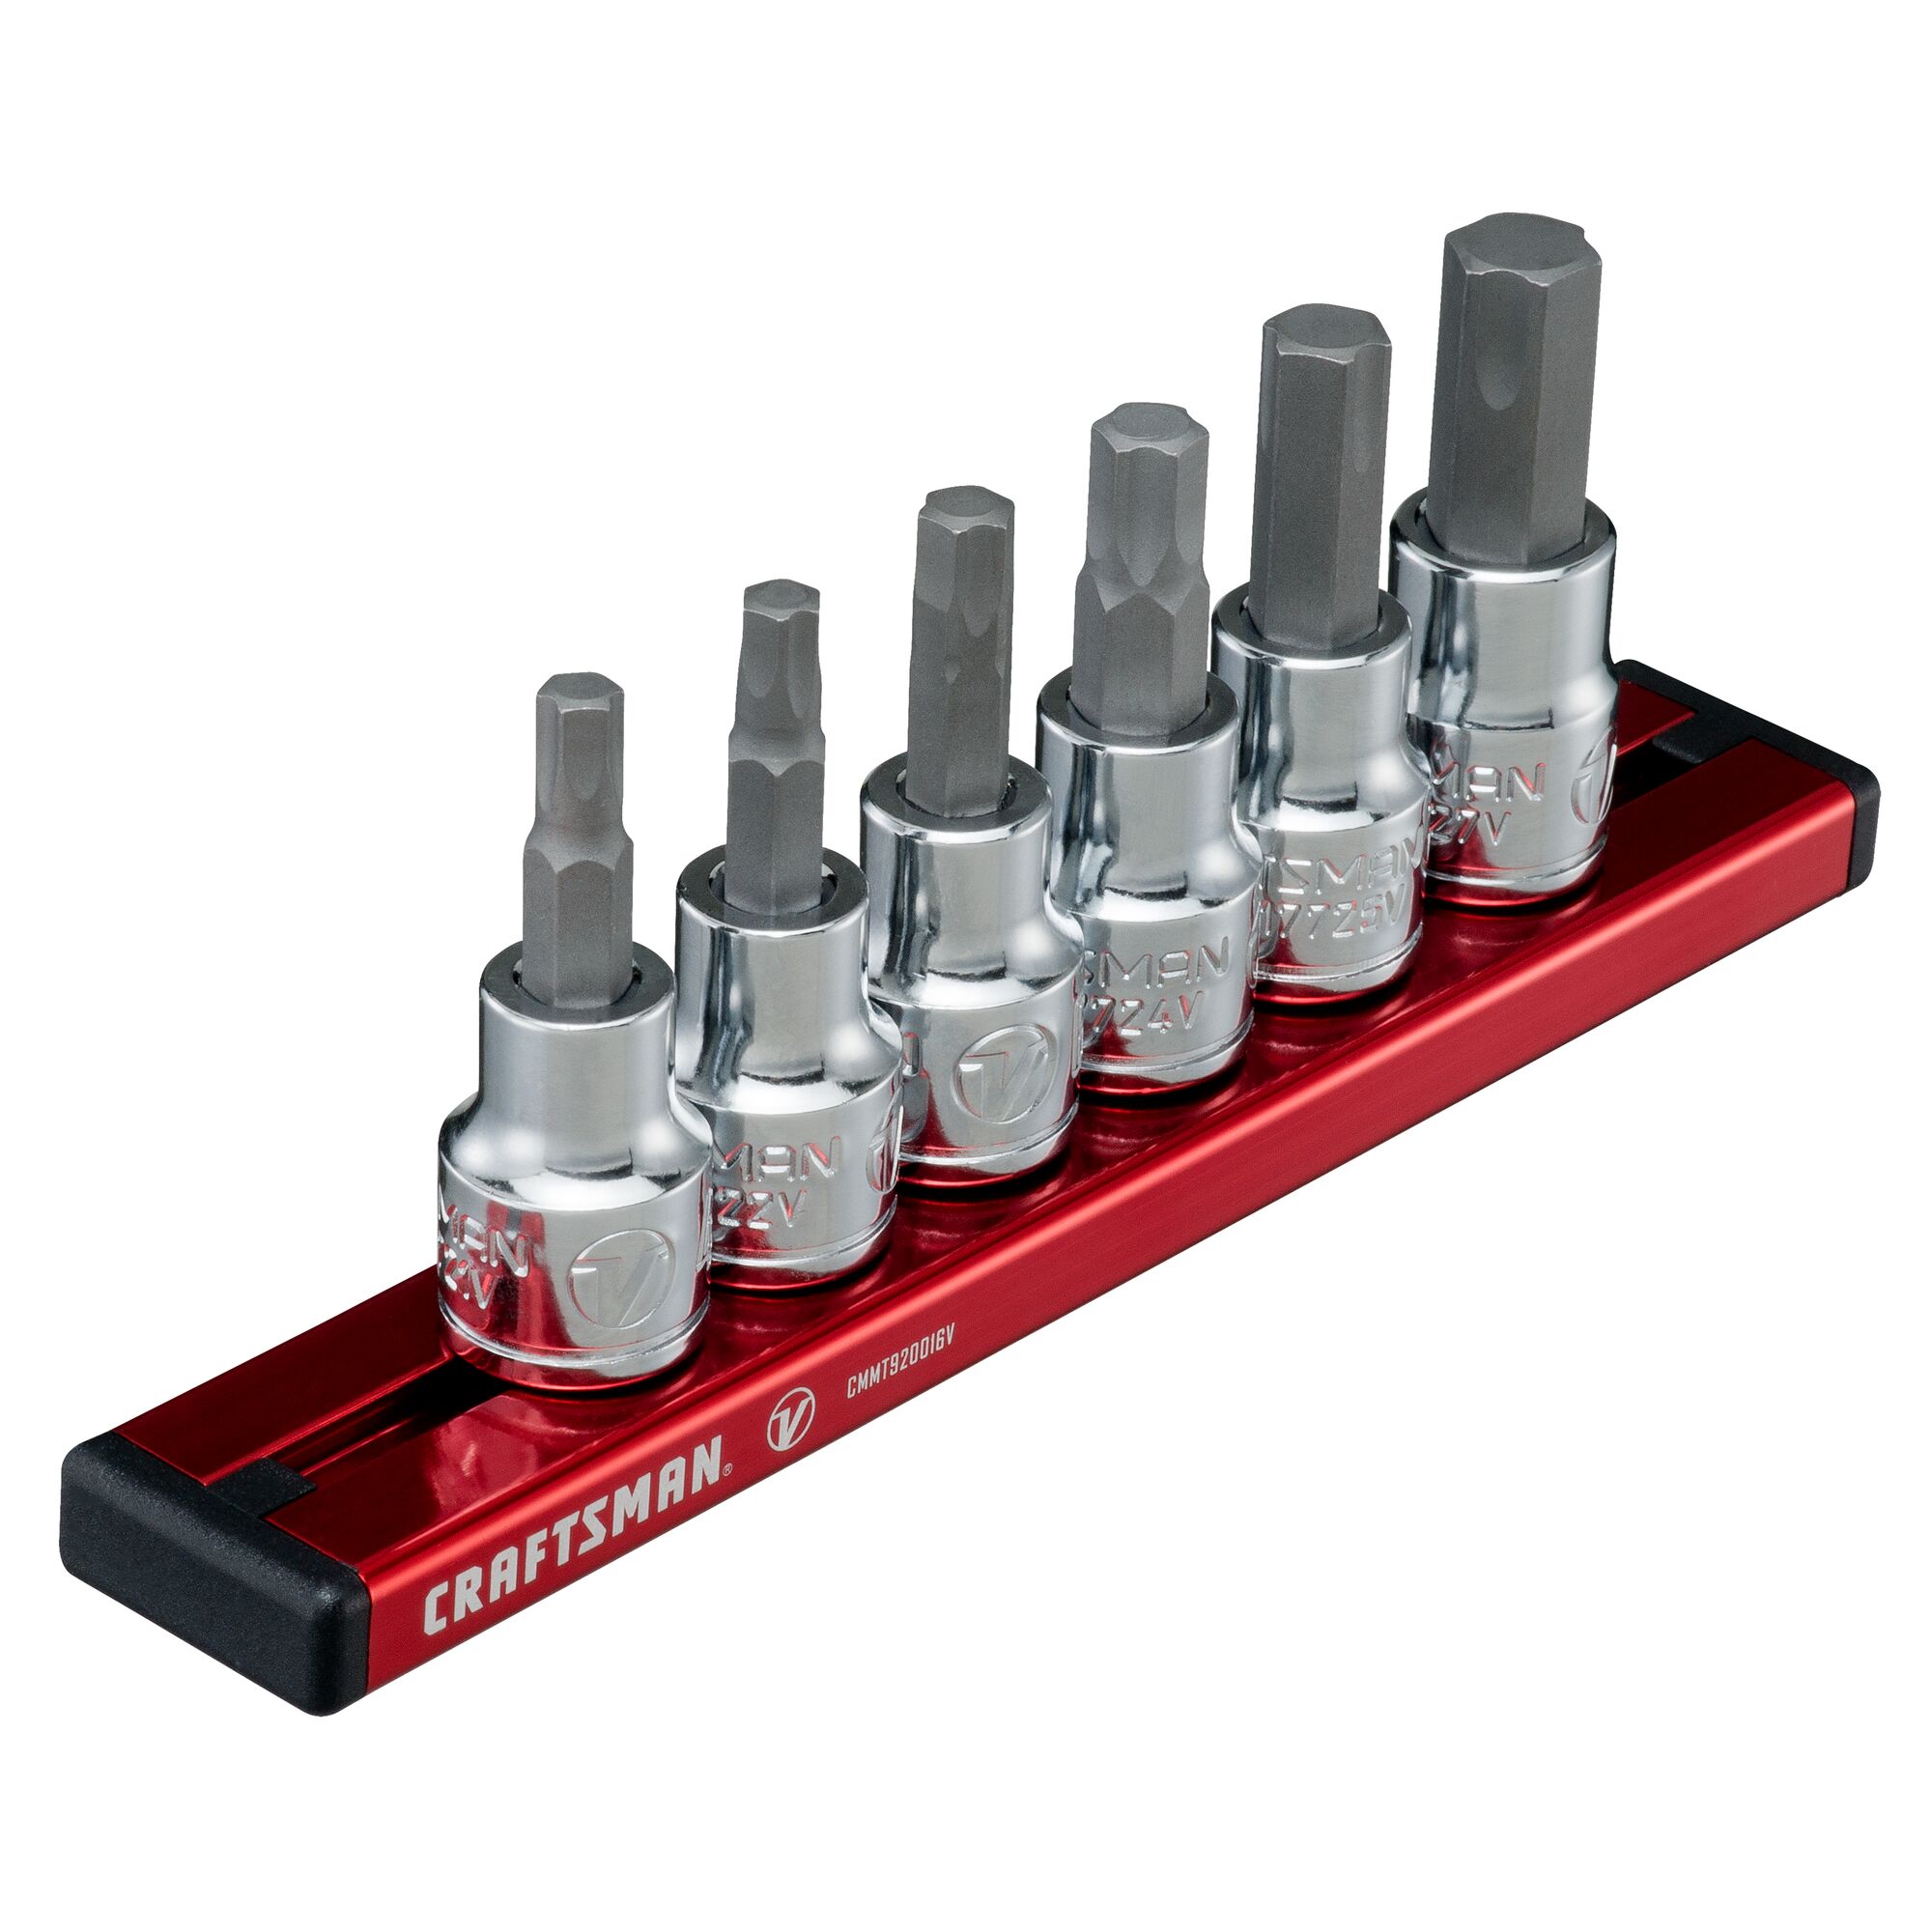 Left profile of 3 eighths inch drive metric x tract technology hex bit socket set 6 piece.